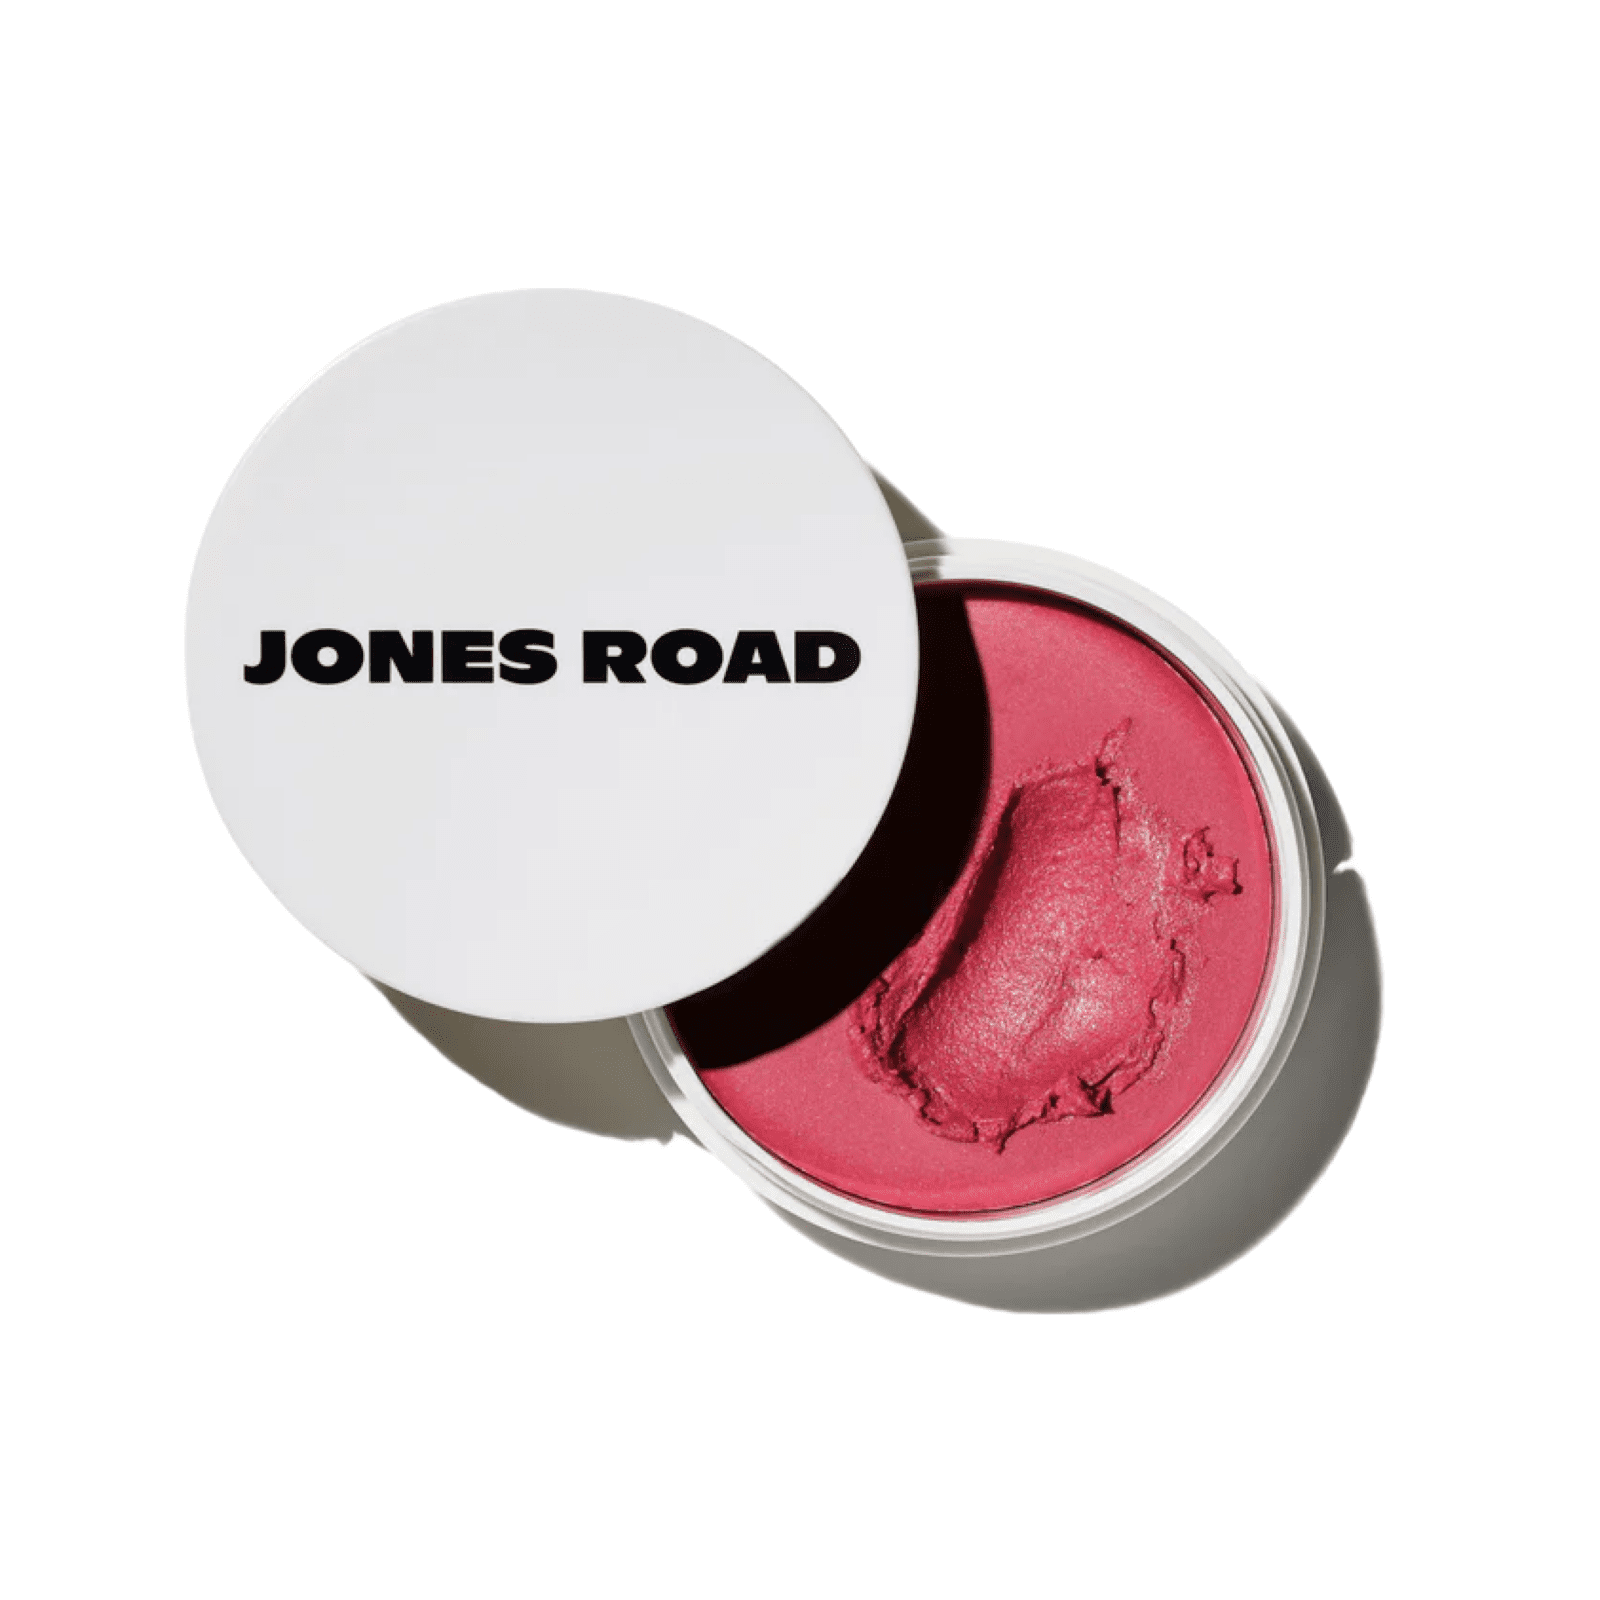 Jones Road Miracle Balm and Other Things I Loved in March 2023